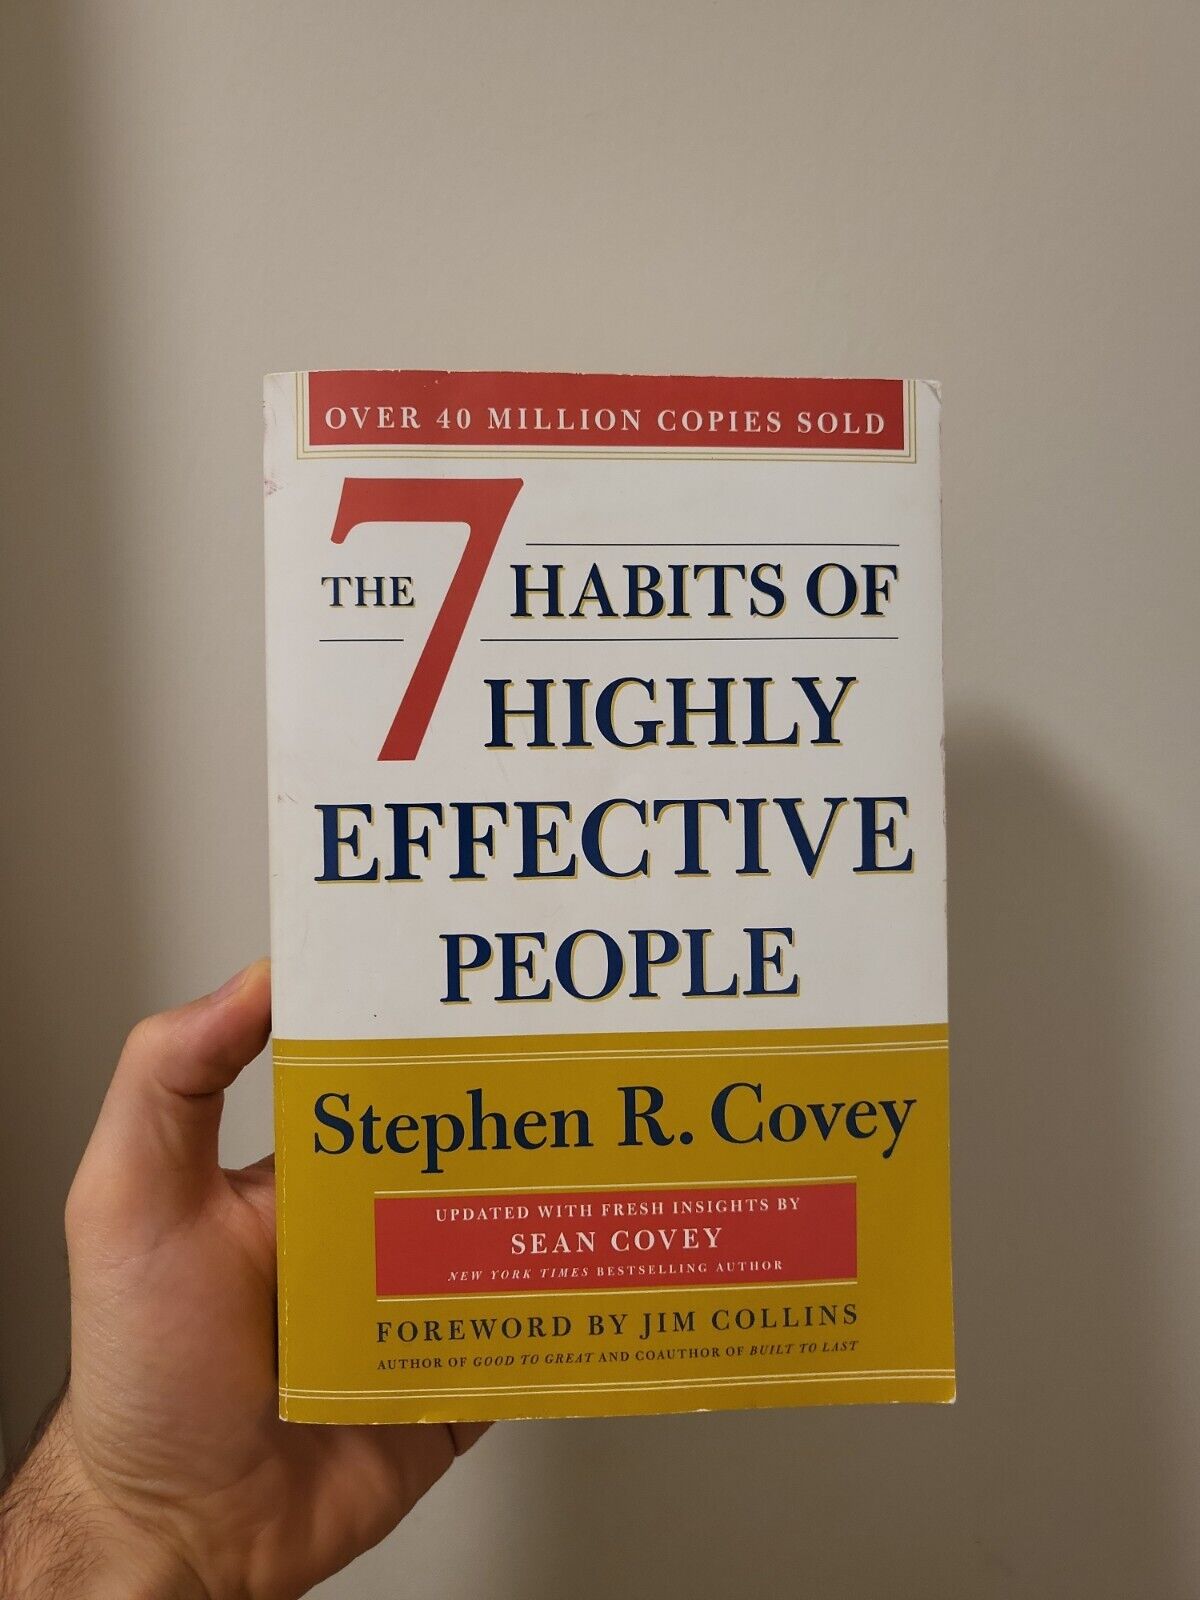 Highly Effective Habits Book - 30th Anniversary Ed